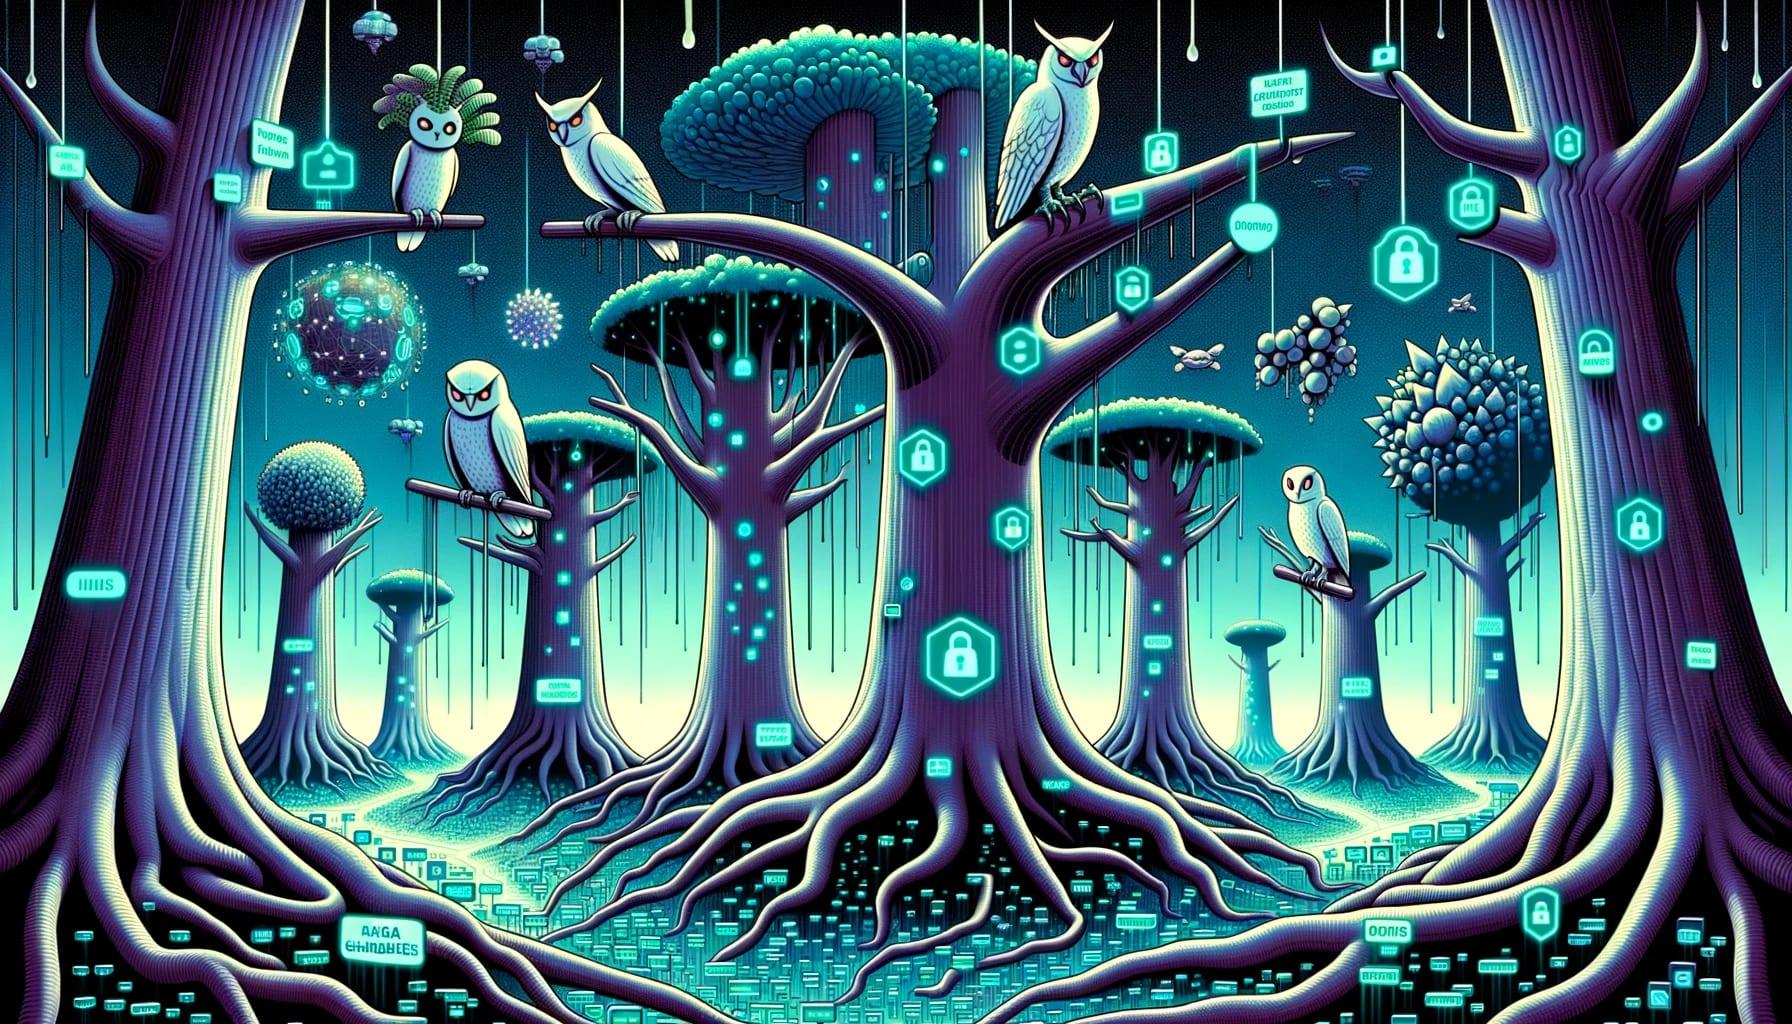 Illustration of a cybernetic forest. Tree-like structures symbolize Large Language Models (LLMs), with their roots diving deep into a digital ground. Sinister digital creatures, representing privacy risks, lurk in the shadows, attempting to corrupt the data flow. Luminous guardians, embodying defenses, ward off these threats, while AI-powered owls oversee, denoting future security services ensuring the protection of the forest.